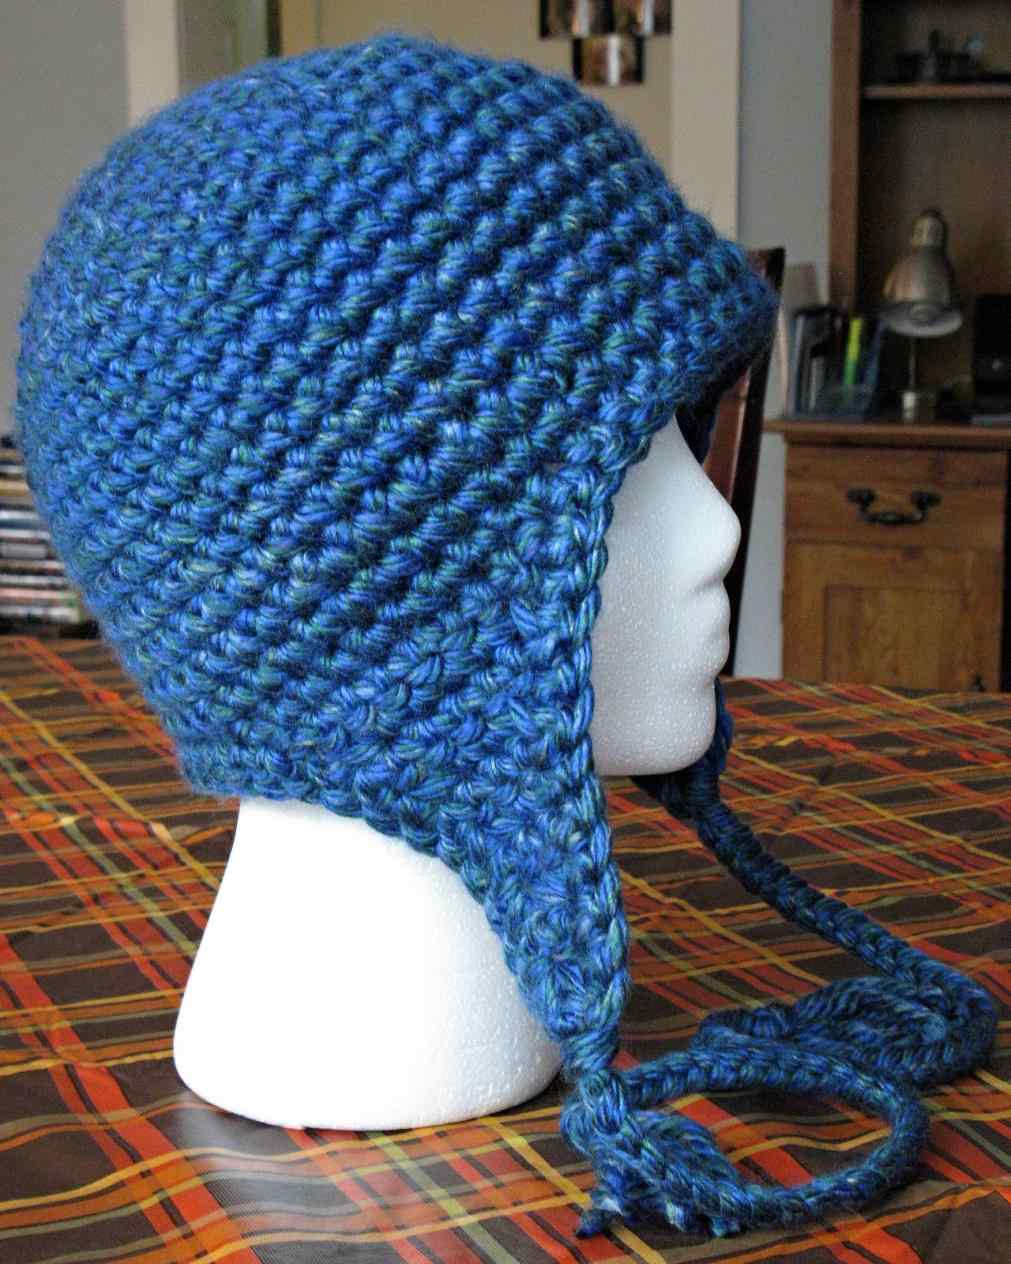 Single Crochet Earflap Hat Pattern How To Single Crochet For Beginners Step Step Gettingthere